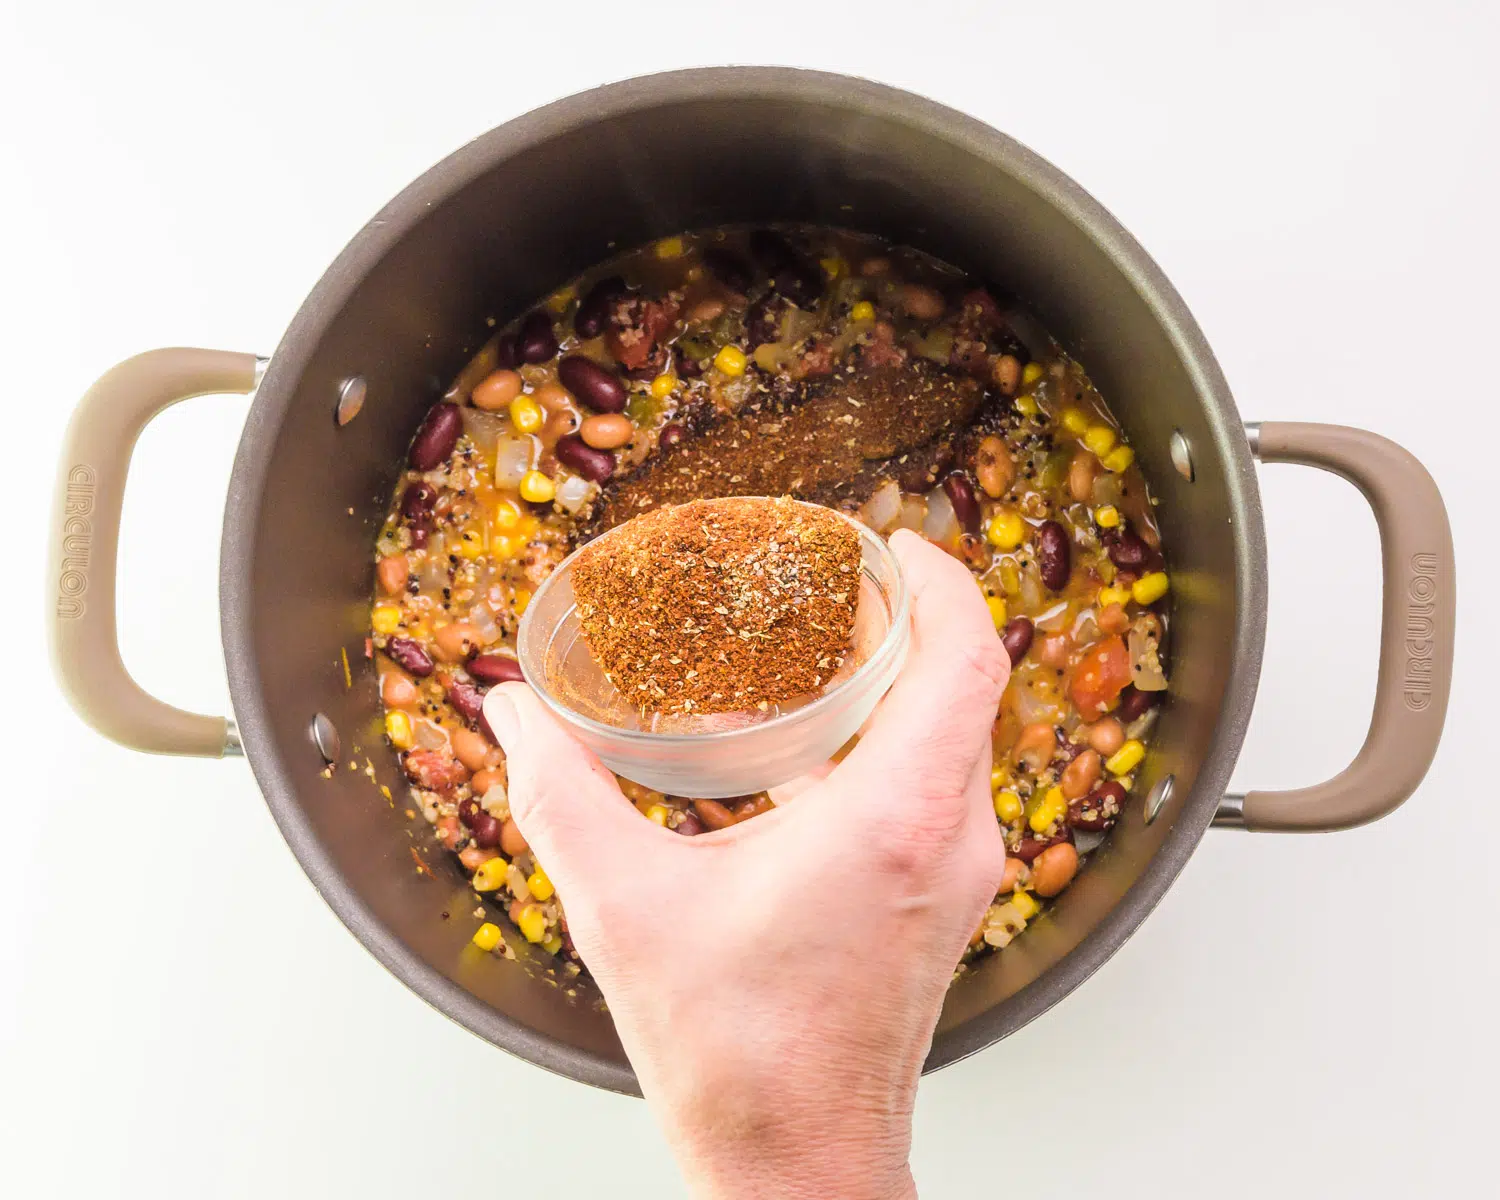 A hand holds a bowl of seasoning, pouring it into a pot of soup.